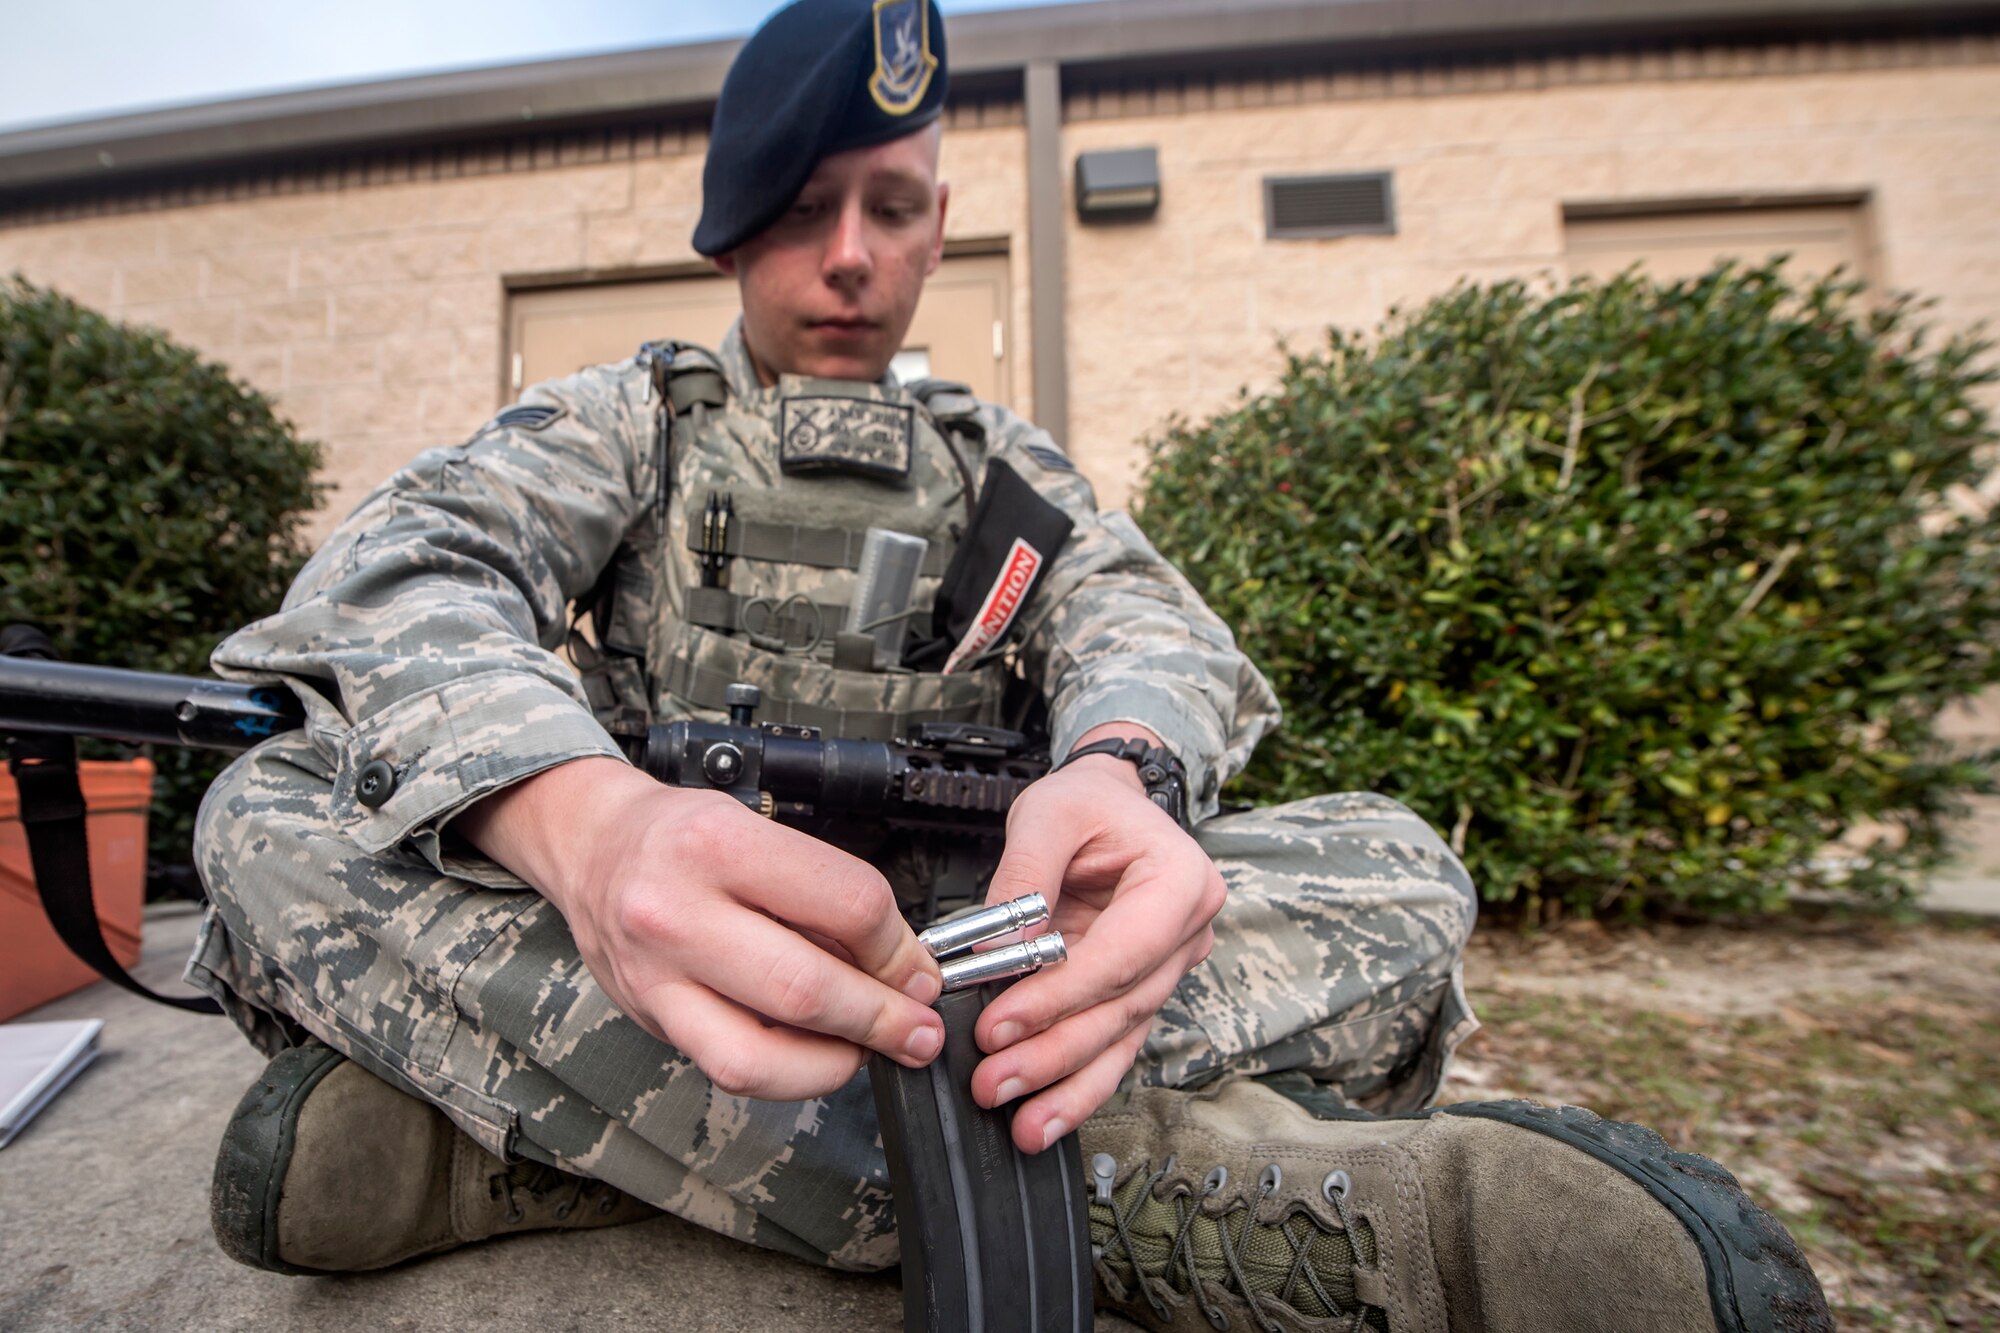 Senior Airman Adam Irwin, 23d Security Forces Squadron installation patrolman, loads simulated bullets into a magazine, Feb. 22, 2018, at Moody Air Force Base, Ga.  The Shoot, move, communicate training event is designed to test participants on their ability to move from barricade to barricade as a team. To be successful, one member provided covering fire while others advanced on the enemy, then retreated from the scenario while they maintained cover fire. Security Forces members could employ these tactics anytime they’re under enemy fire.
(U.S. Air Force photo by Airman Eugene Oliver)